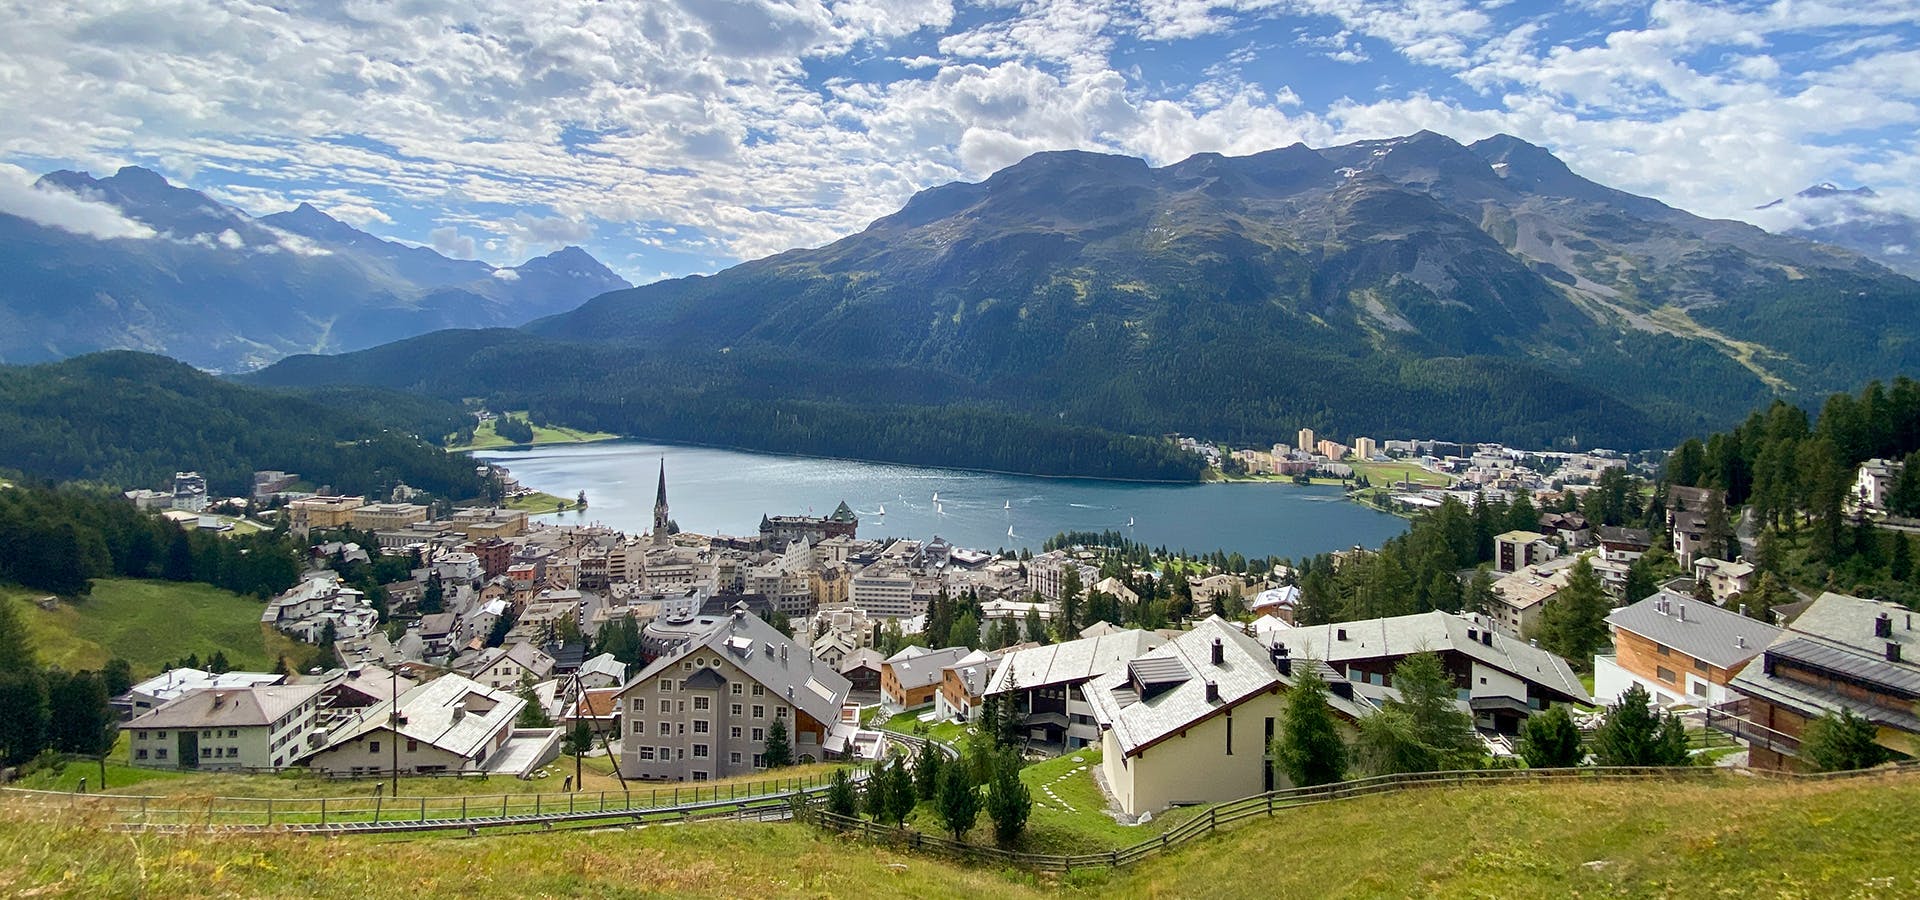 - St. Moritz Paradise Summer Finds 5 this Interesting in